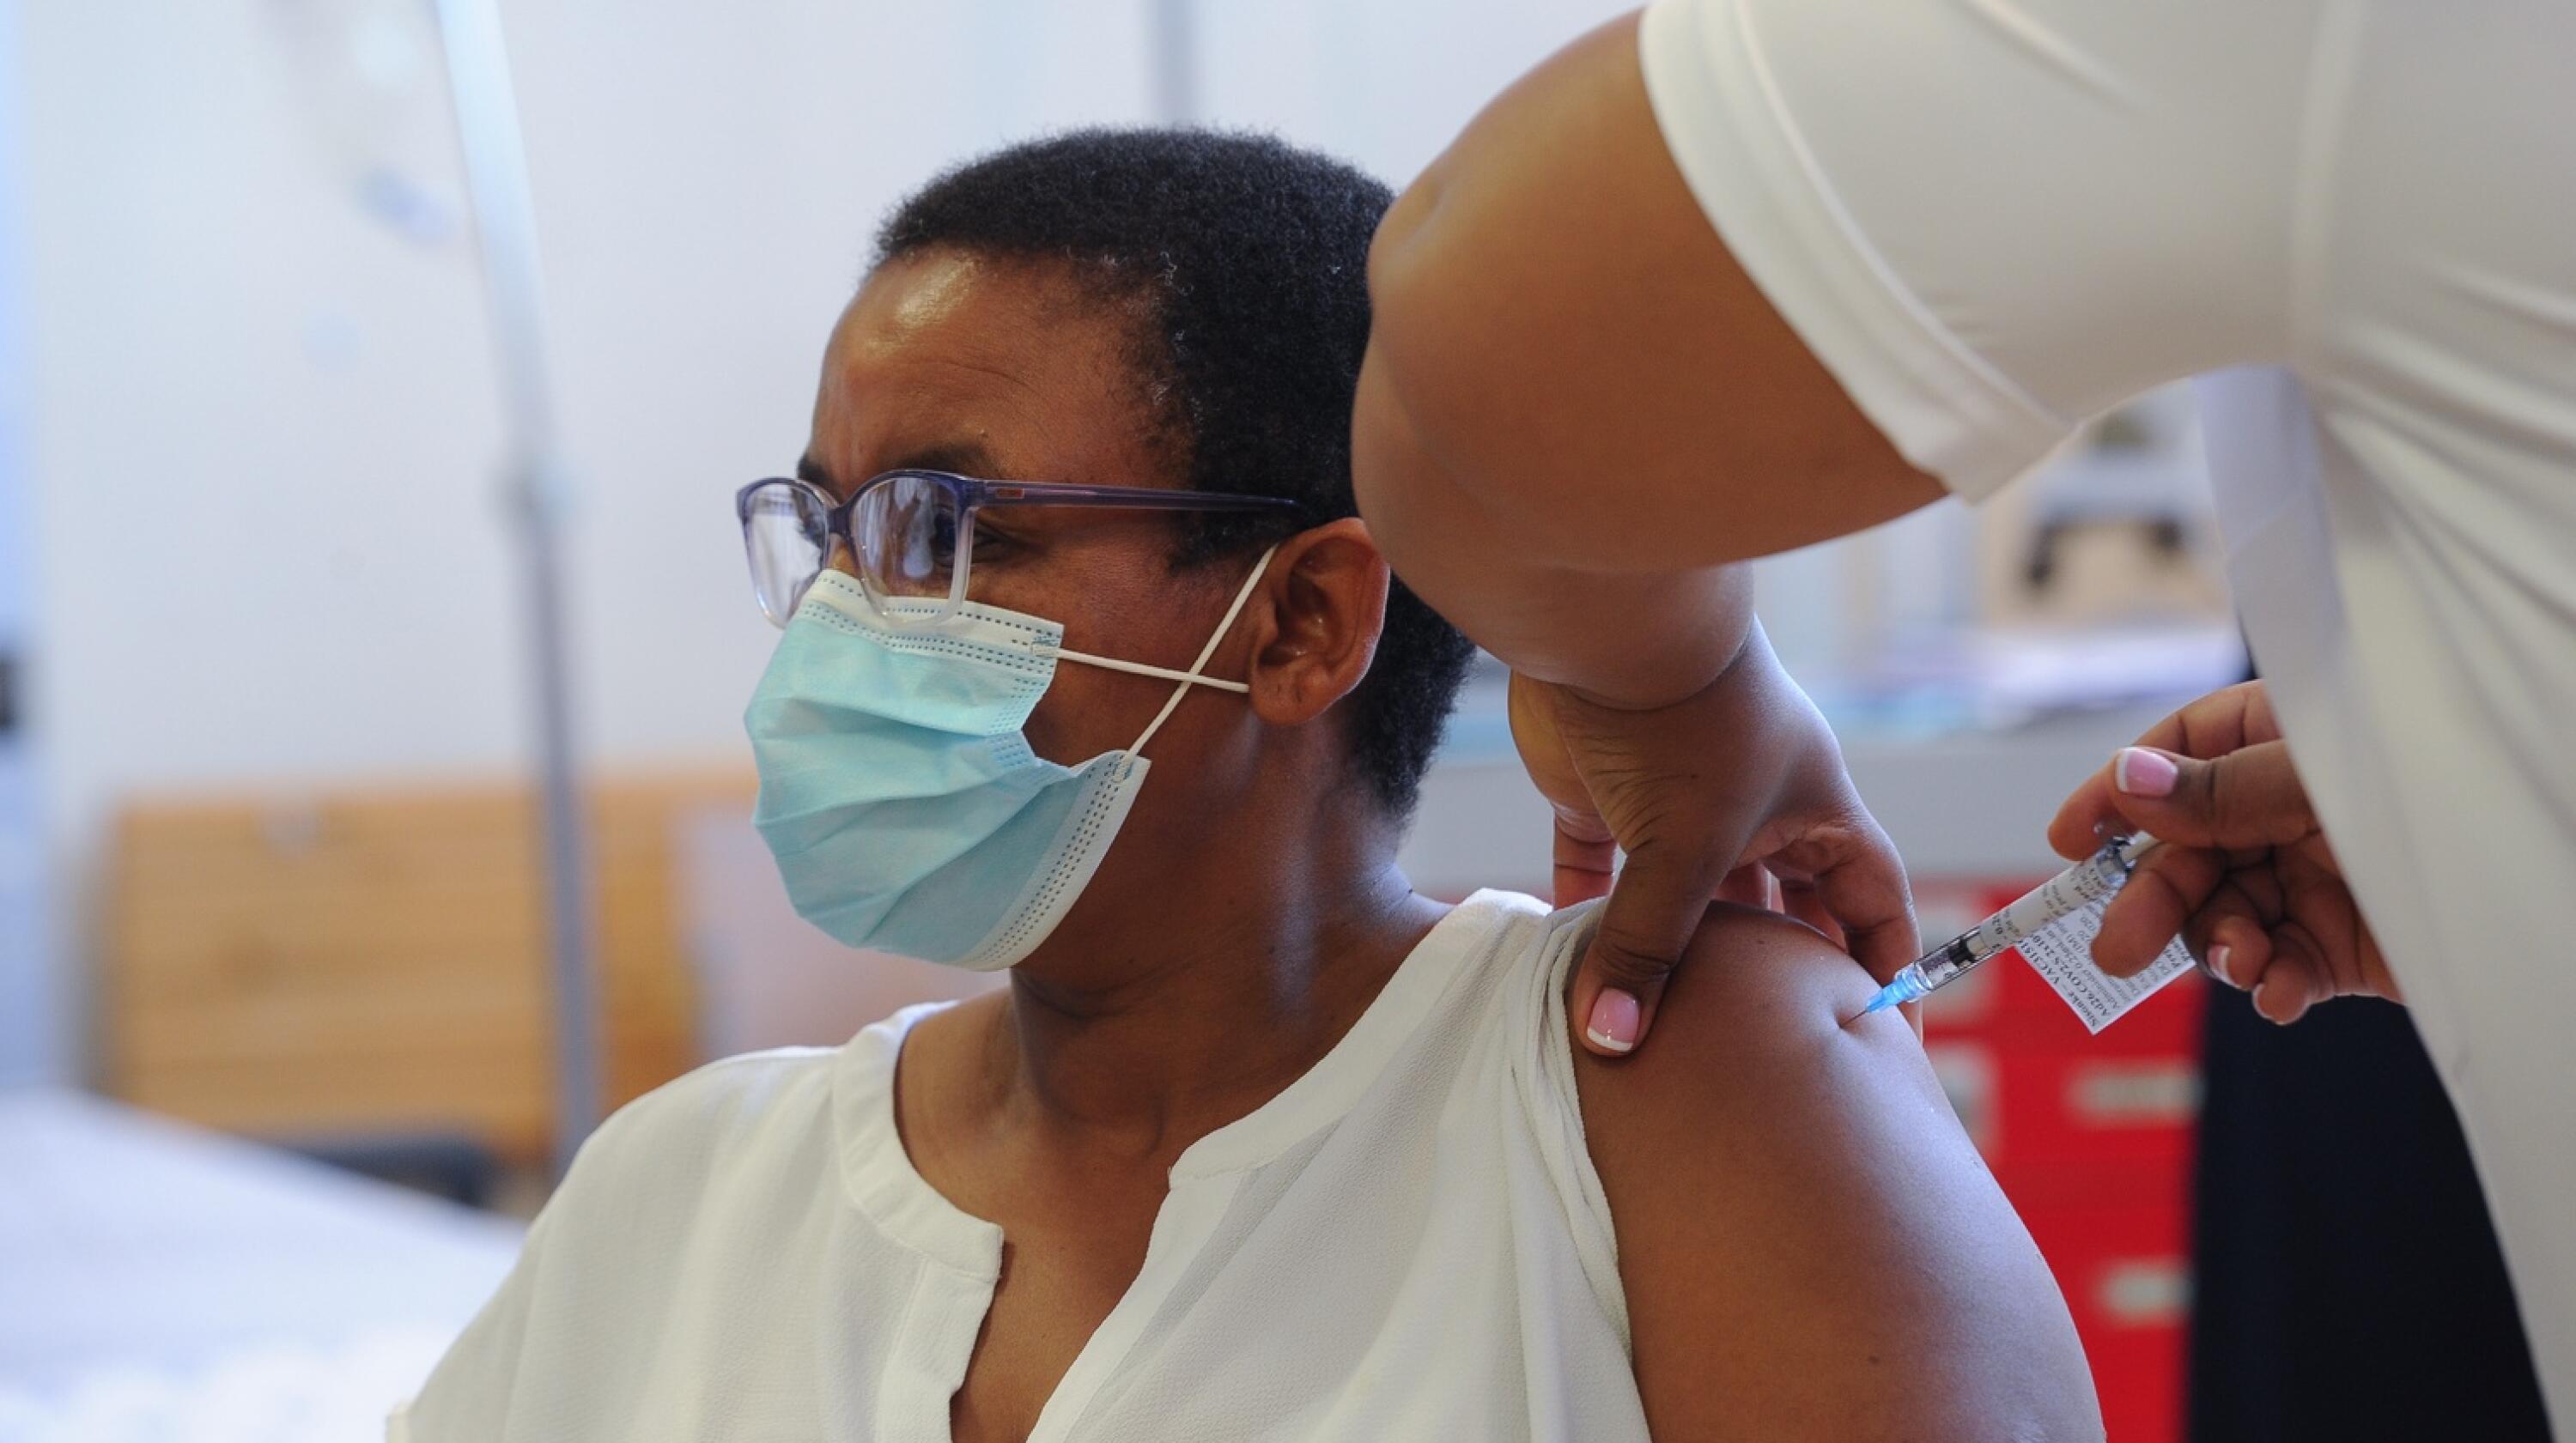 The Independent Community Pharmacy Association South Africa (ICPA) has said the Health Department has been slow to reimburse pharmacies for services rendered during the National Vaccine Rollout Programme.